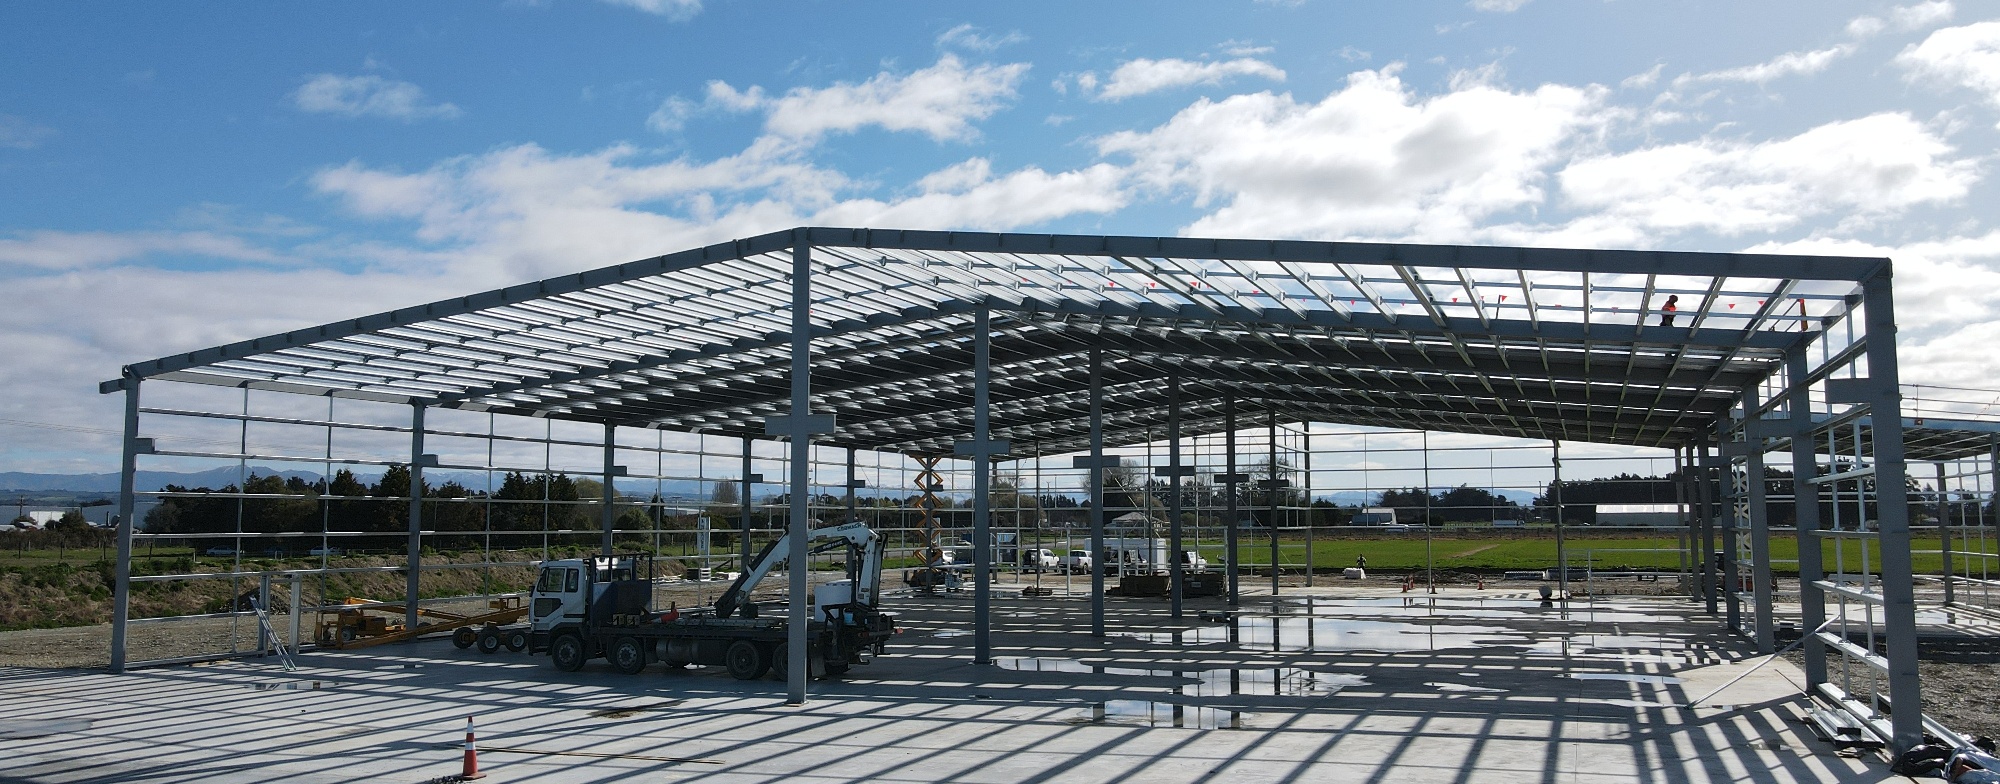 Structural steel systems